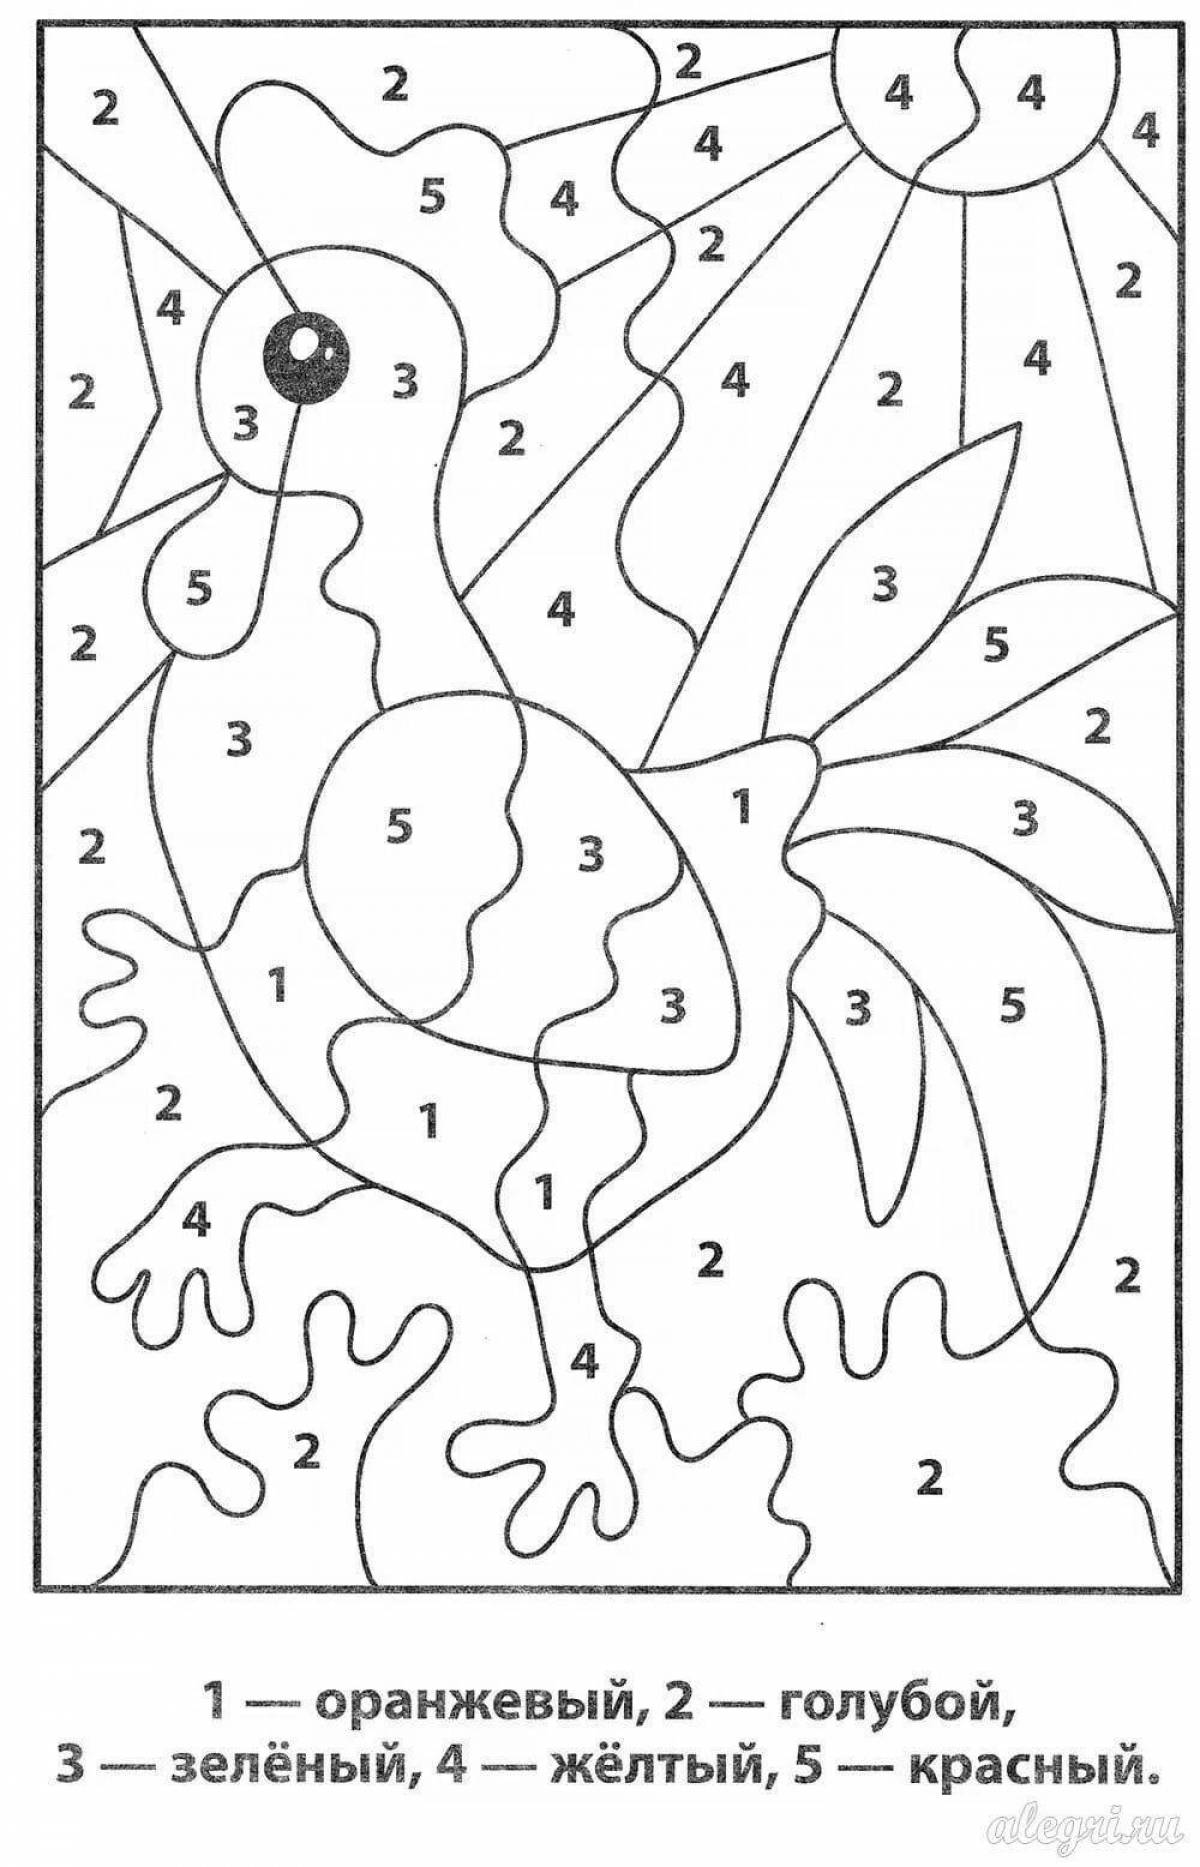 Joyful coloring by numbers for children 6 years old